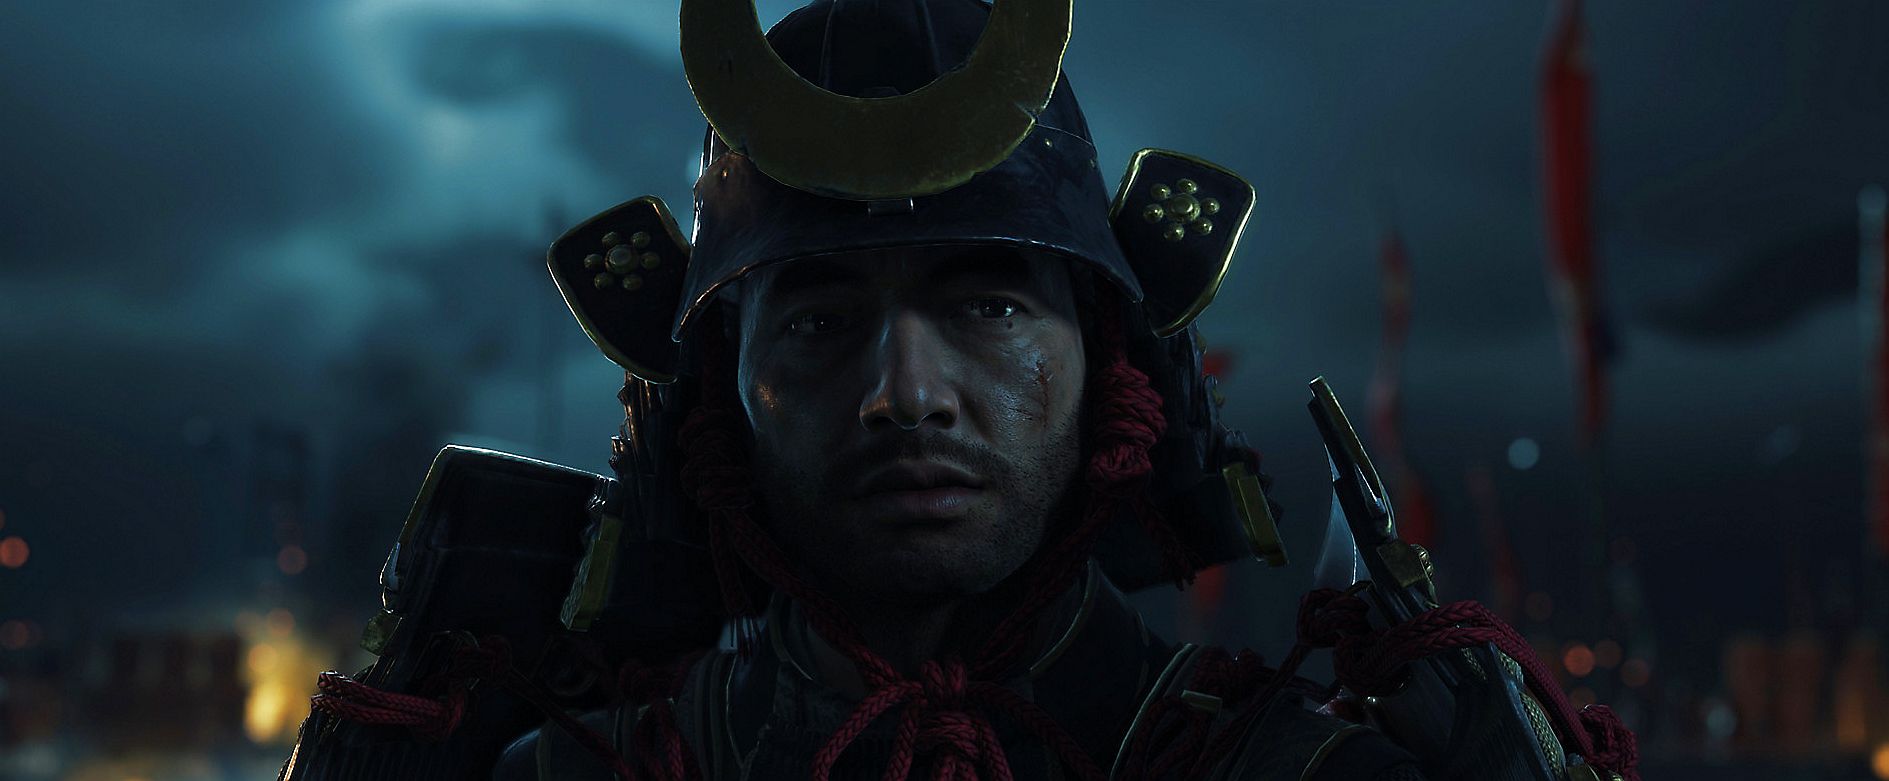 Image for Ghost of Tsushima players have racked up some interesting stats